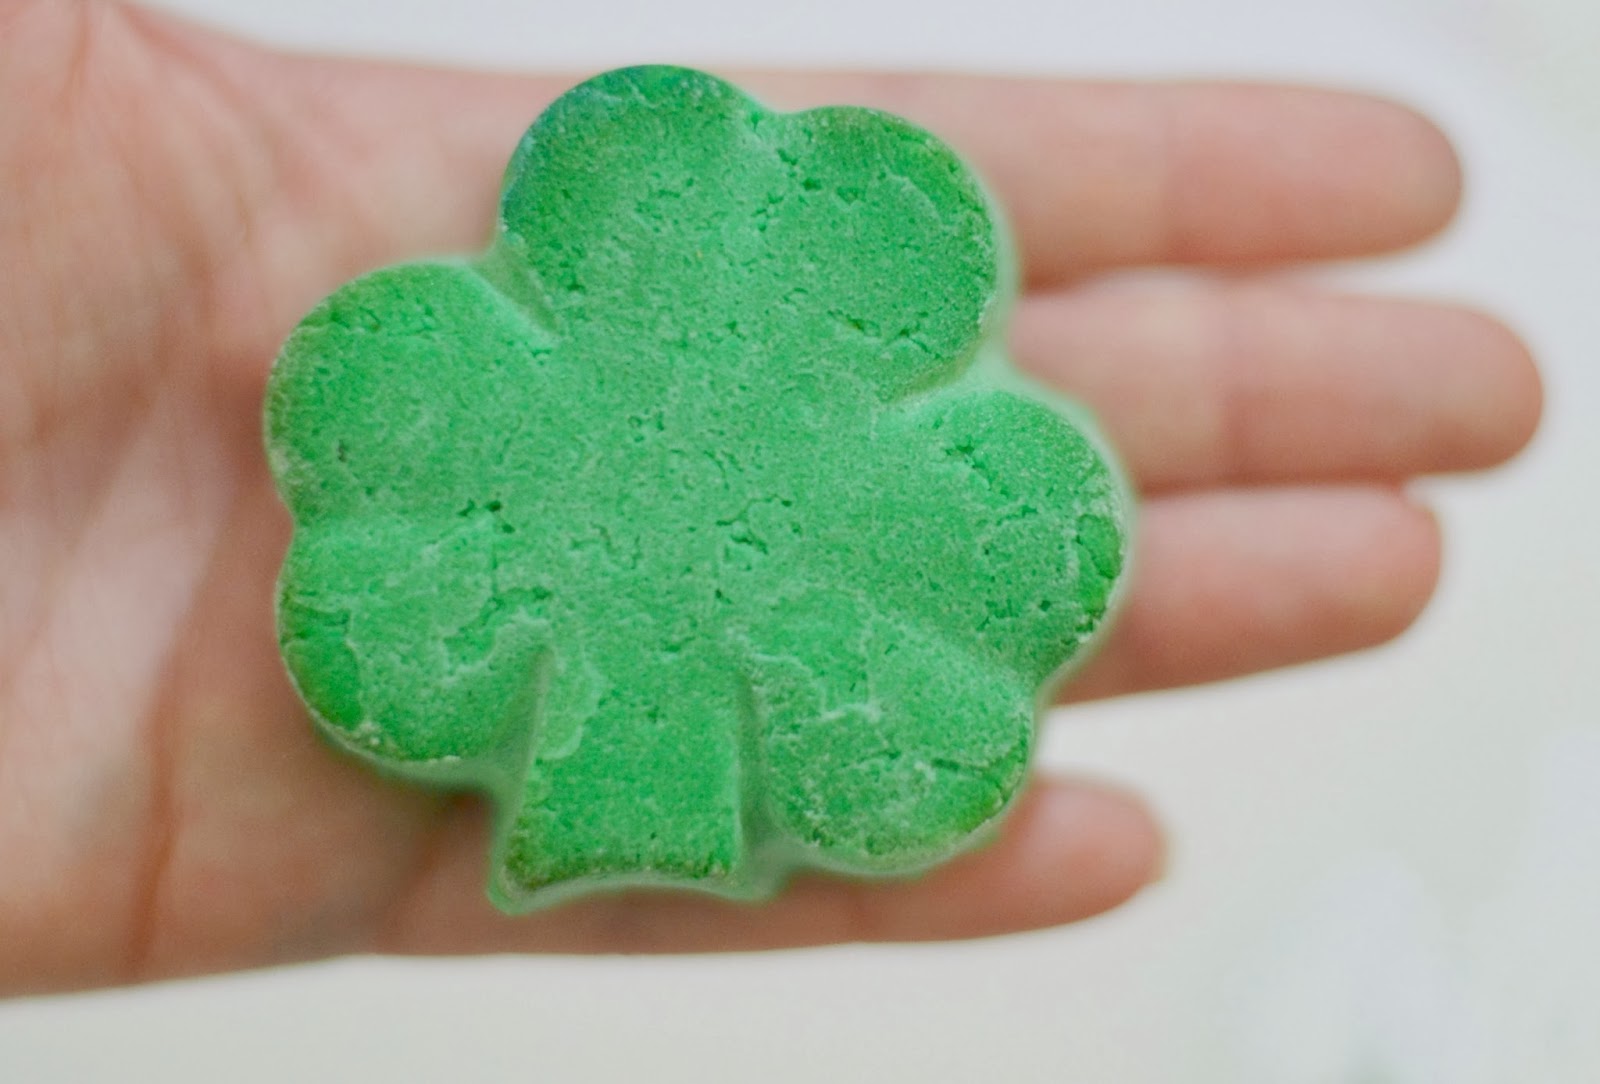 MAGIC Shamrocks with treasures hidden inside- getting the treasures out is all the fun!